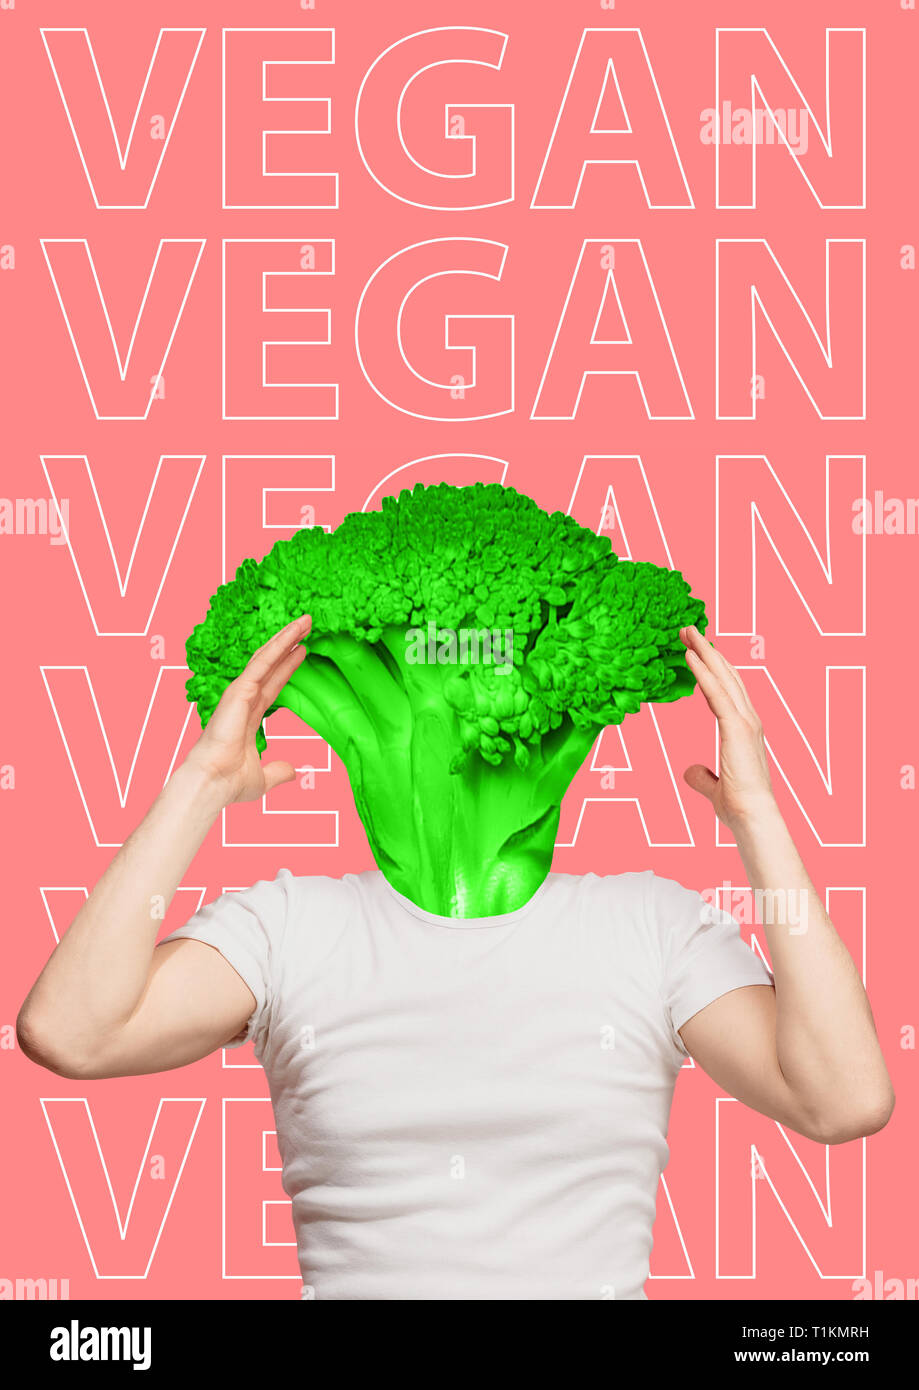 Vegan has only green thoughts. Surprised man in white short with green juicy broccoli as a head on trendy coral background. Healthy food and veganism concept. Modern design. Contemporary art collage. Stock Photo